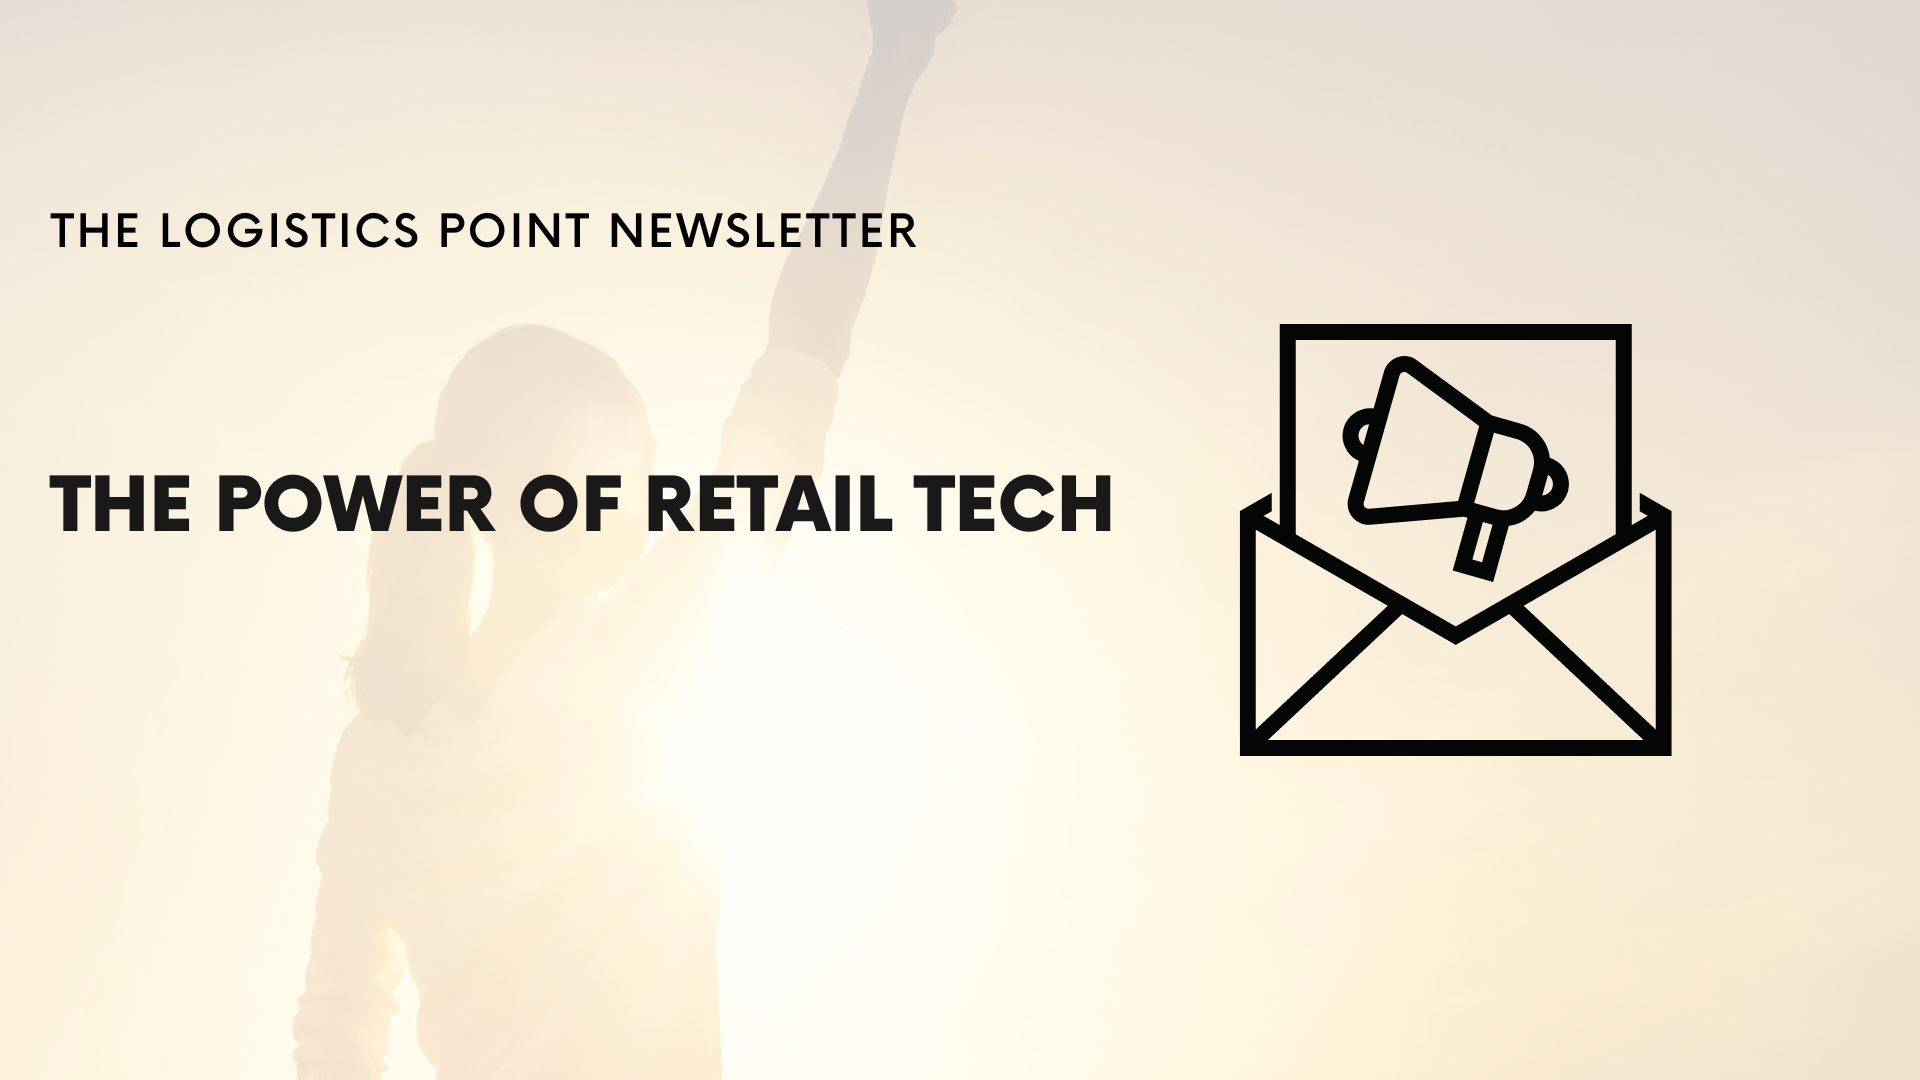 VIDEO The Power of Retail Tech